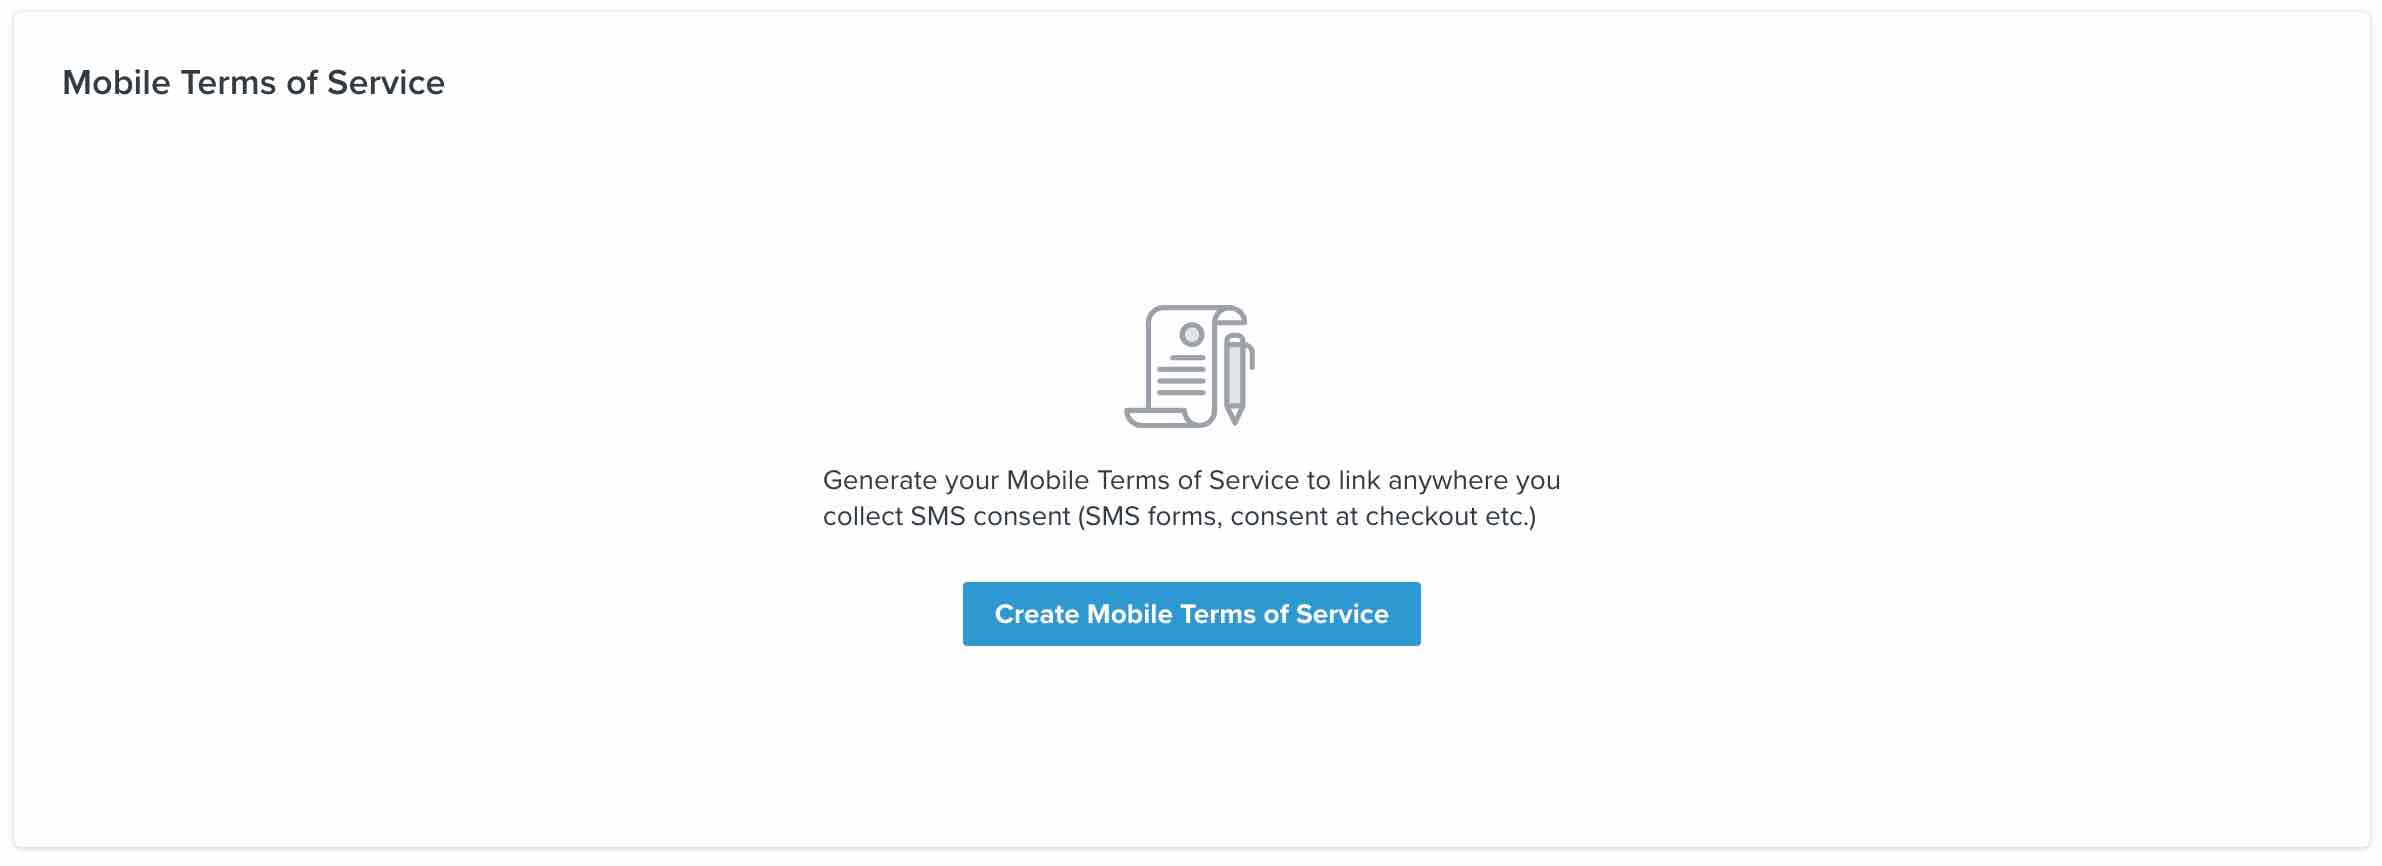 Mobile Terms of Service section in the SMS settings page